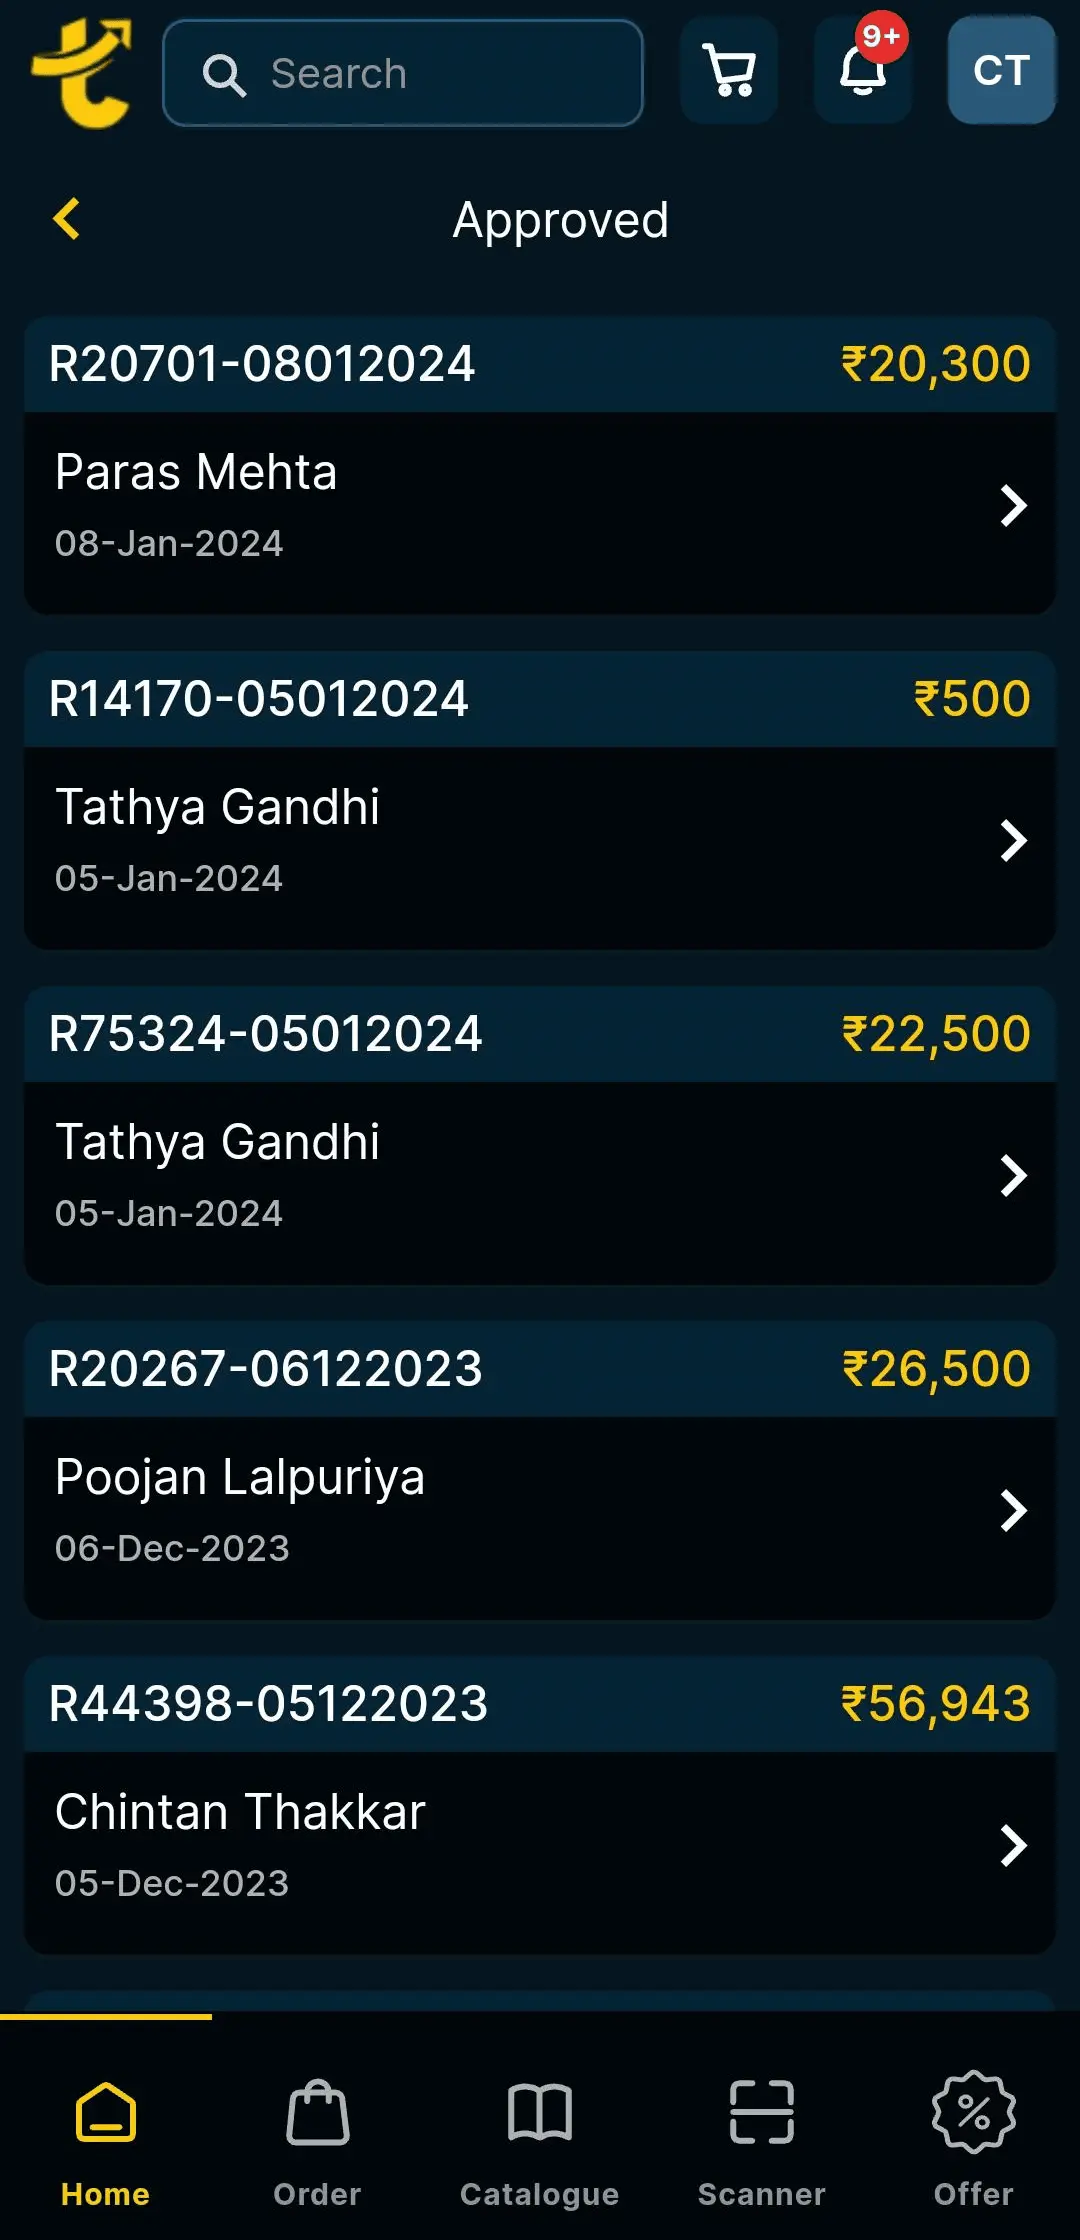 Tanyo CRM mobile app screen showing a list of approved transactions with reference numbers, names of recipients, dates, and amounts in Indian Rupees.